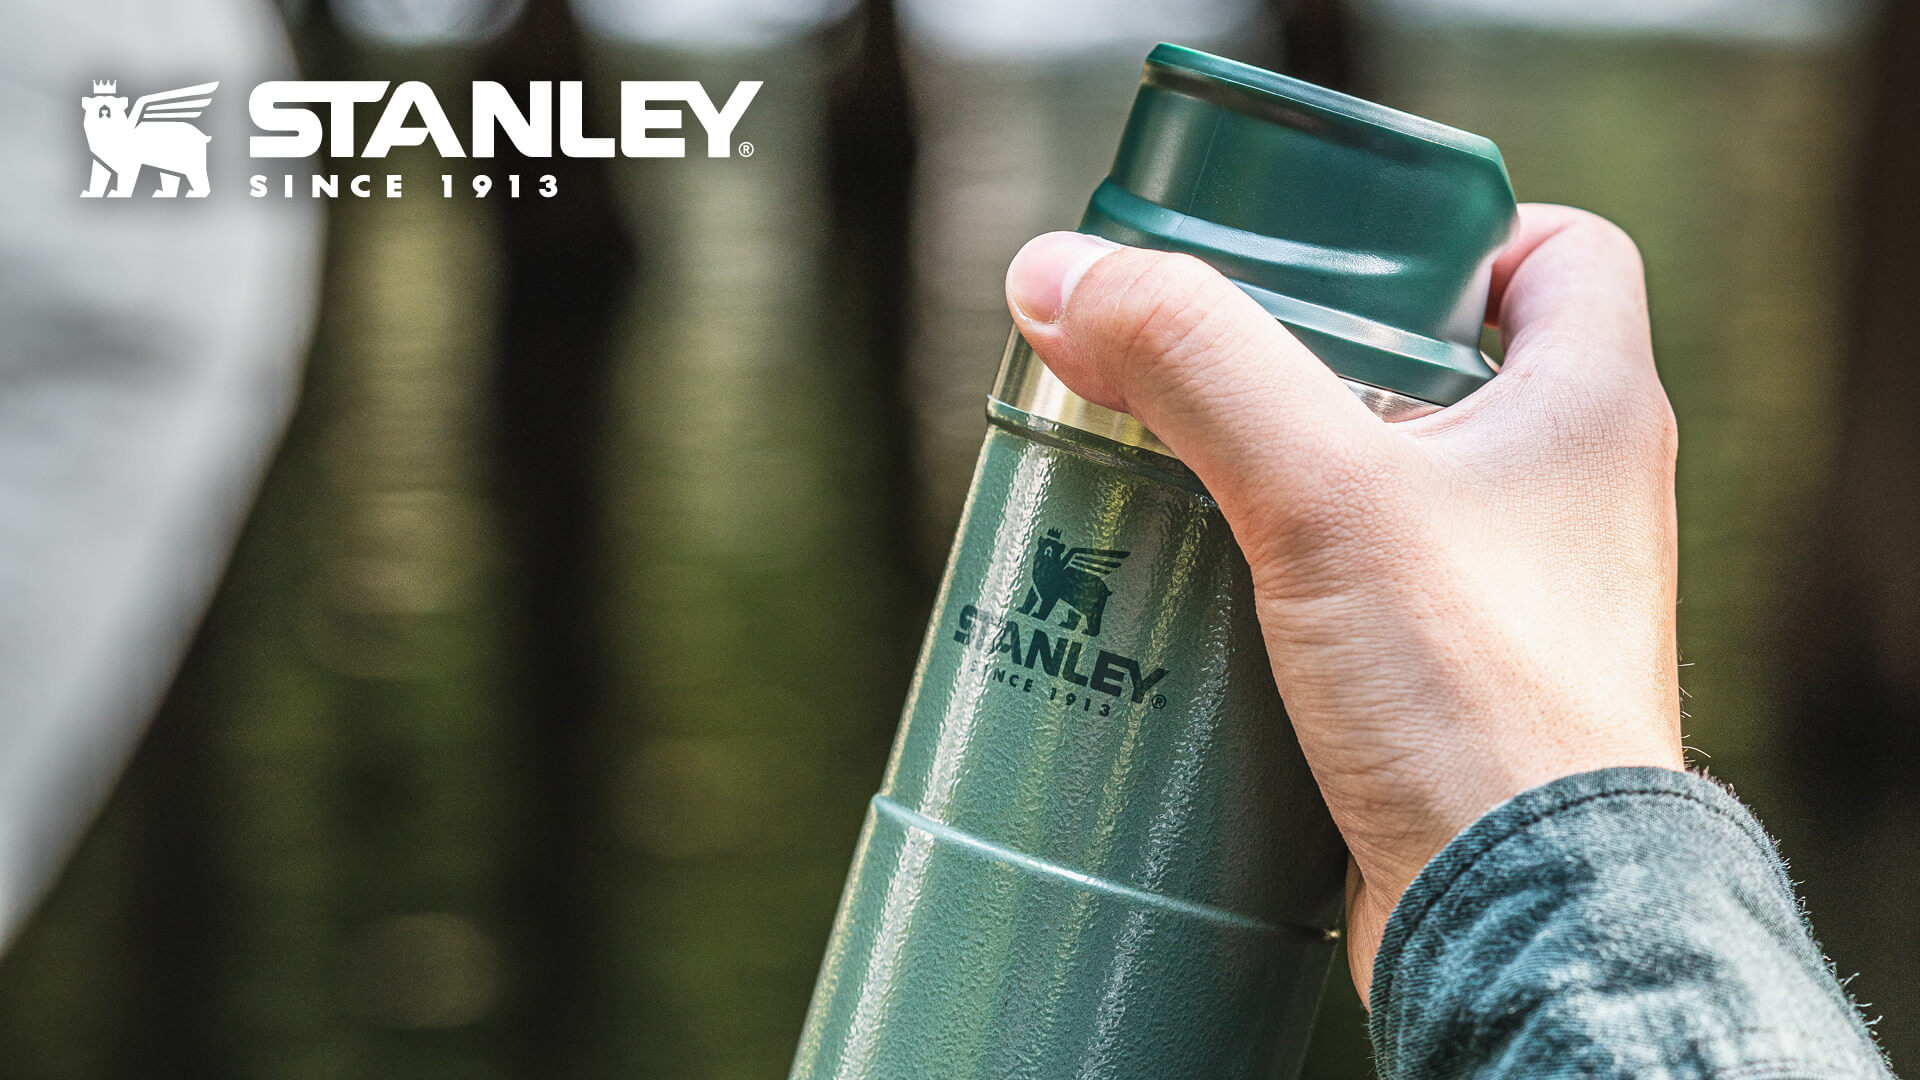 Stanley-Banners-1920-x-1080-px-21_2.jpg